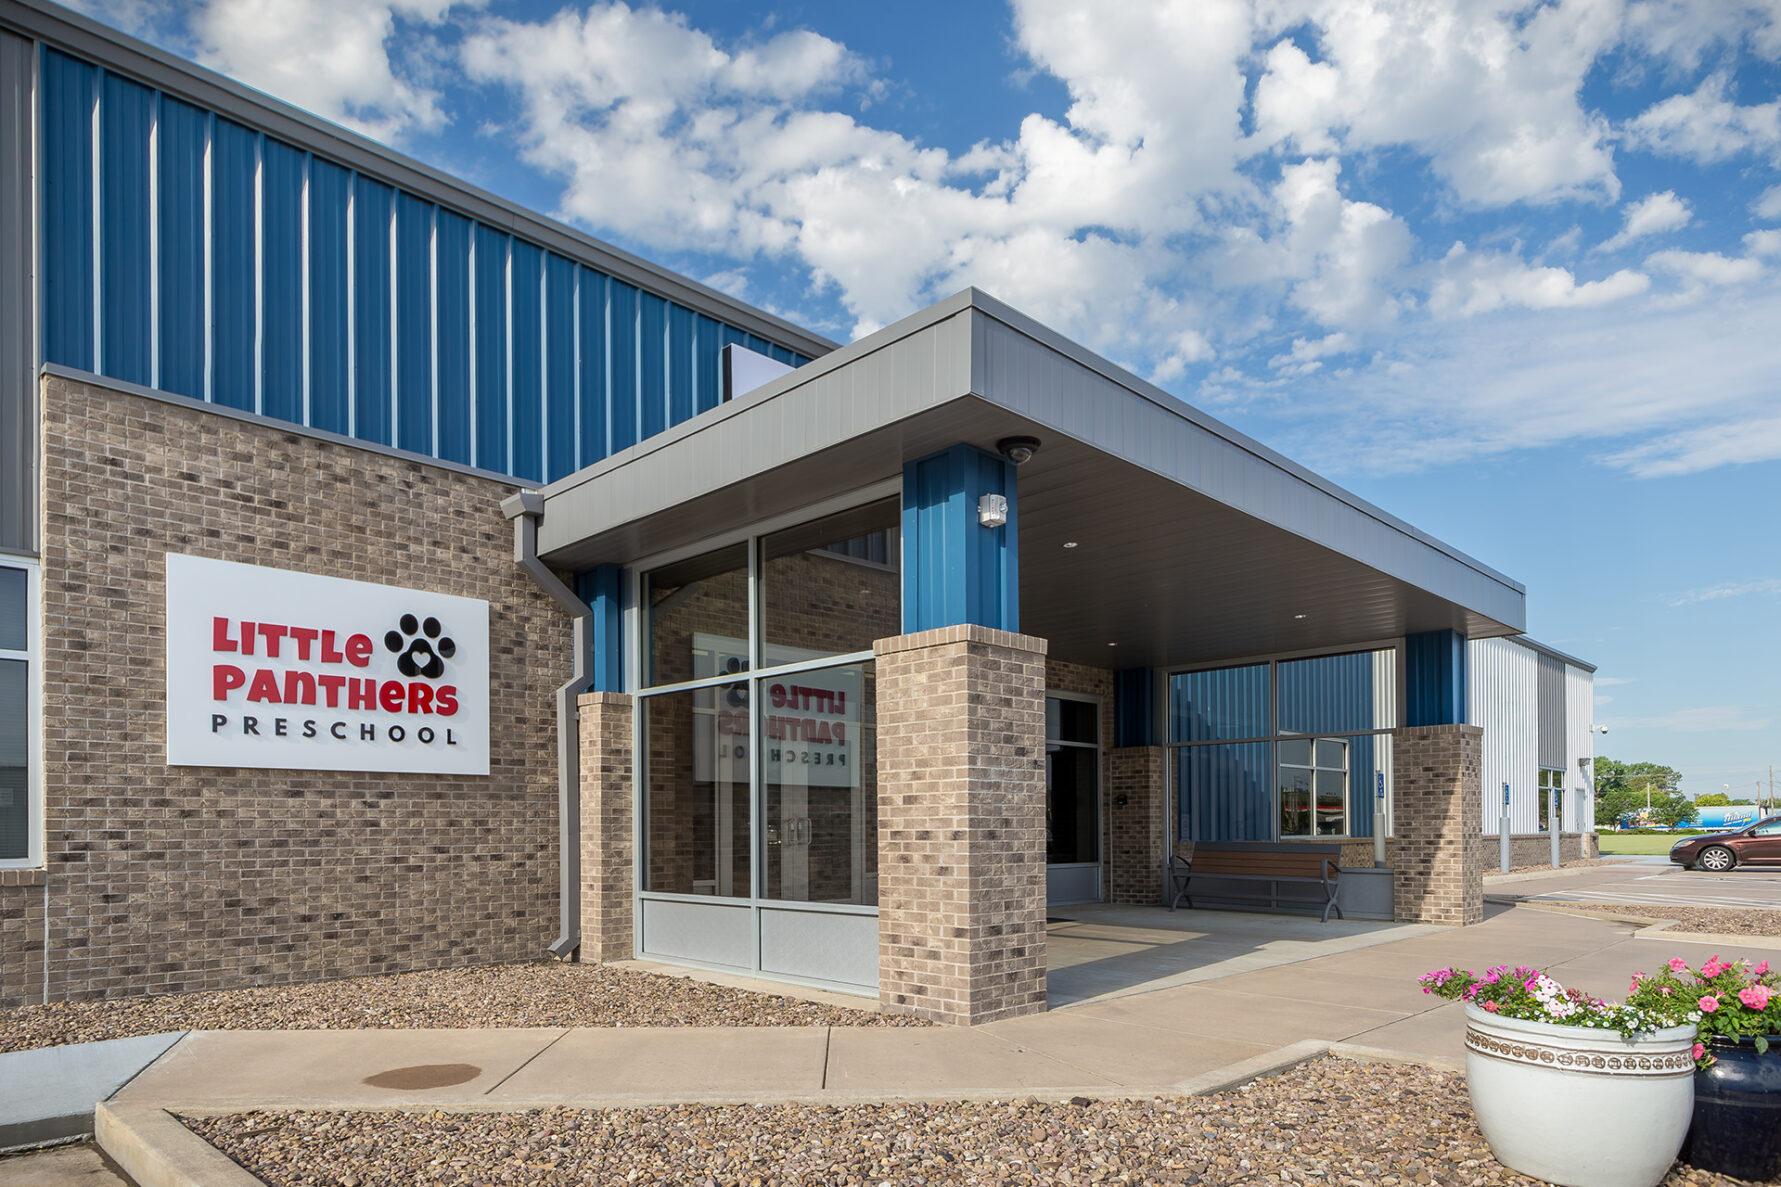 The entrance of Little Panthers Preschool in Great Bend - built by McCownGordon Construction.